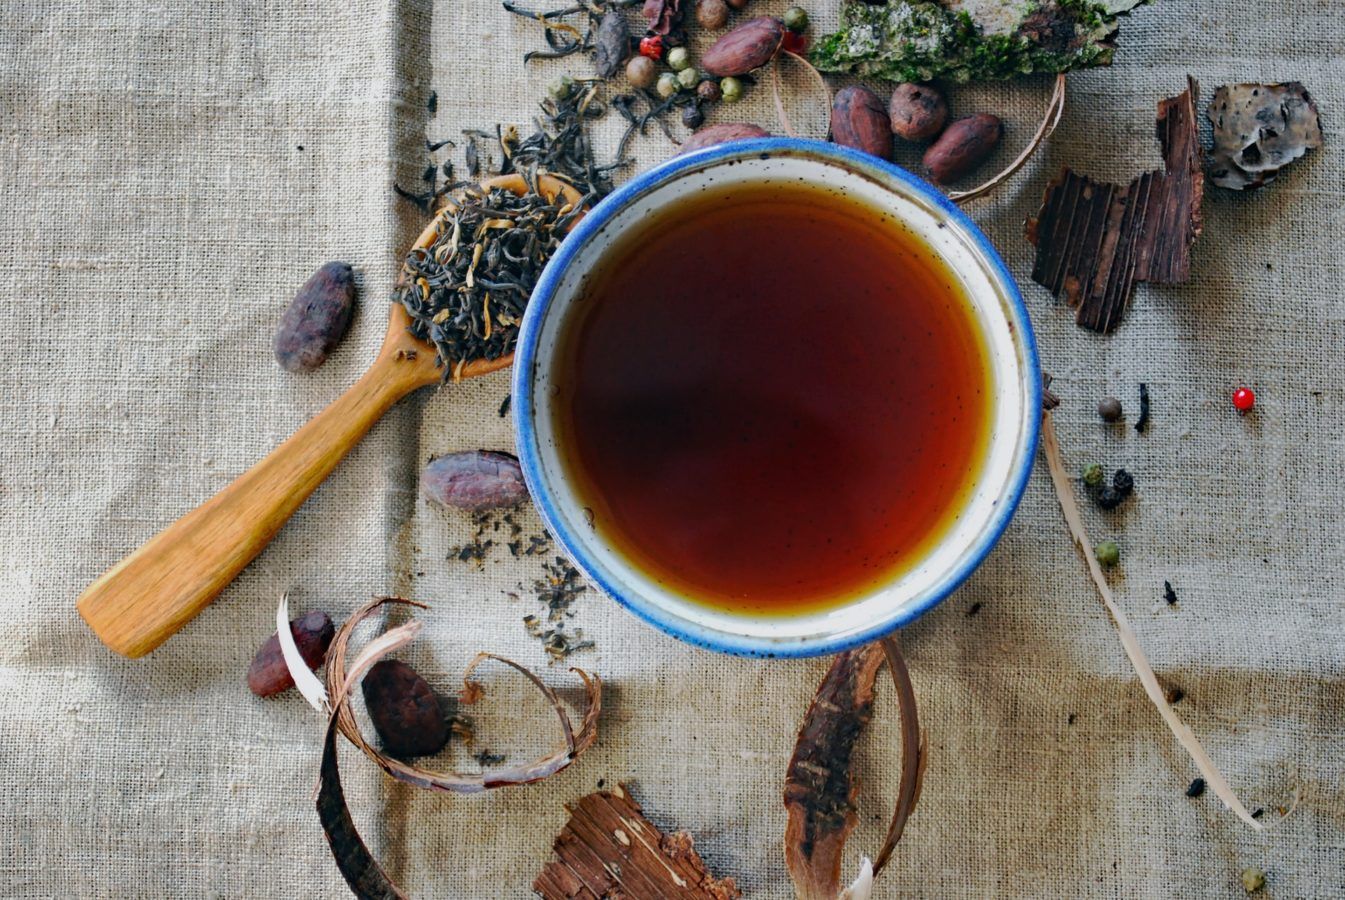 10 of the world’s most expensive teas and how much they cost